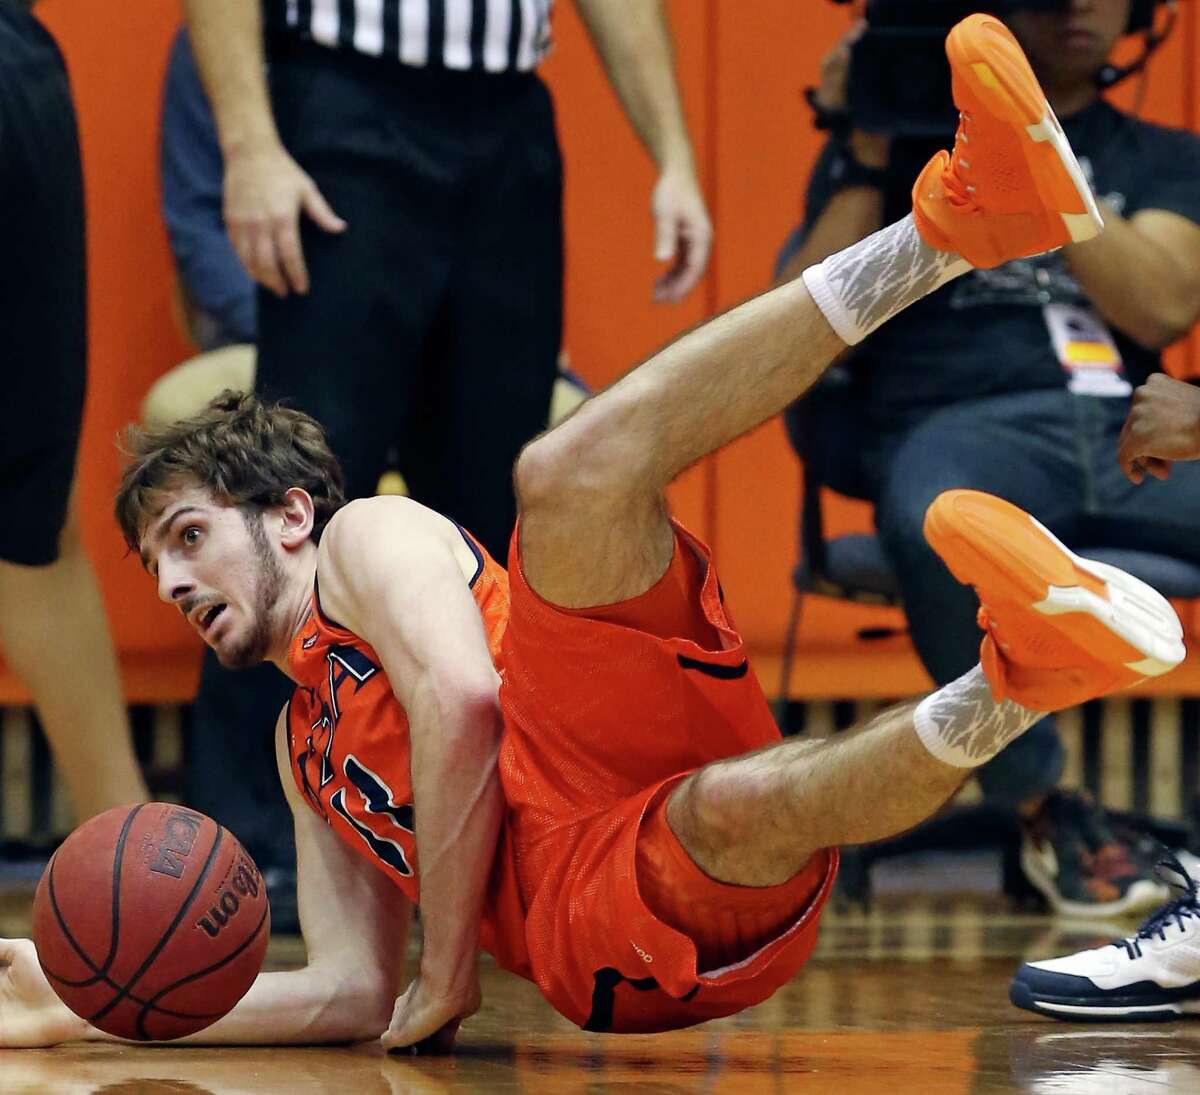 UTSA's Austin Karrer dives for a loose ball during second half action against UTEP Saturday Jan. 16, 2016 at the Convocation Center. UTSA won 71-67.